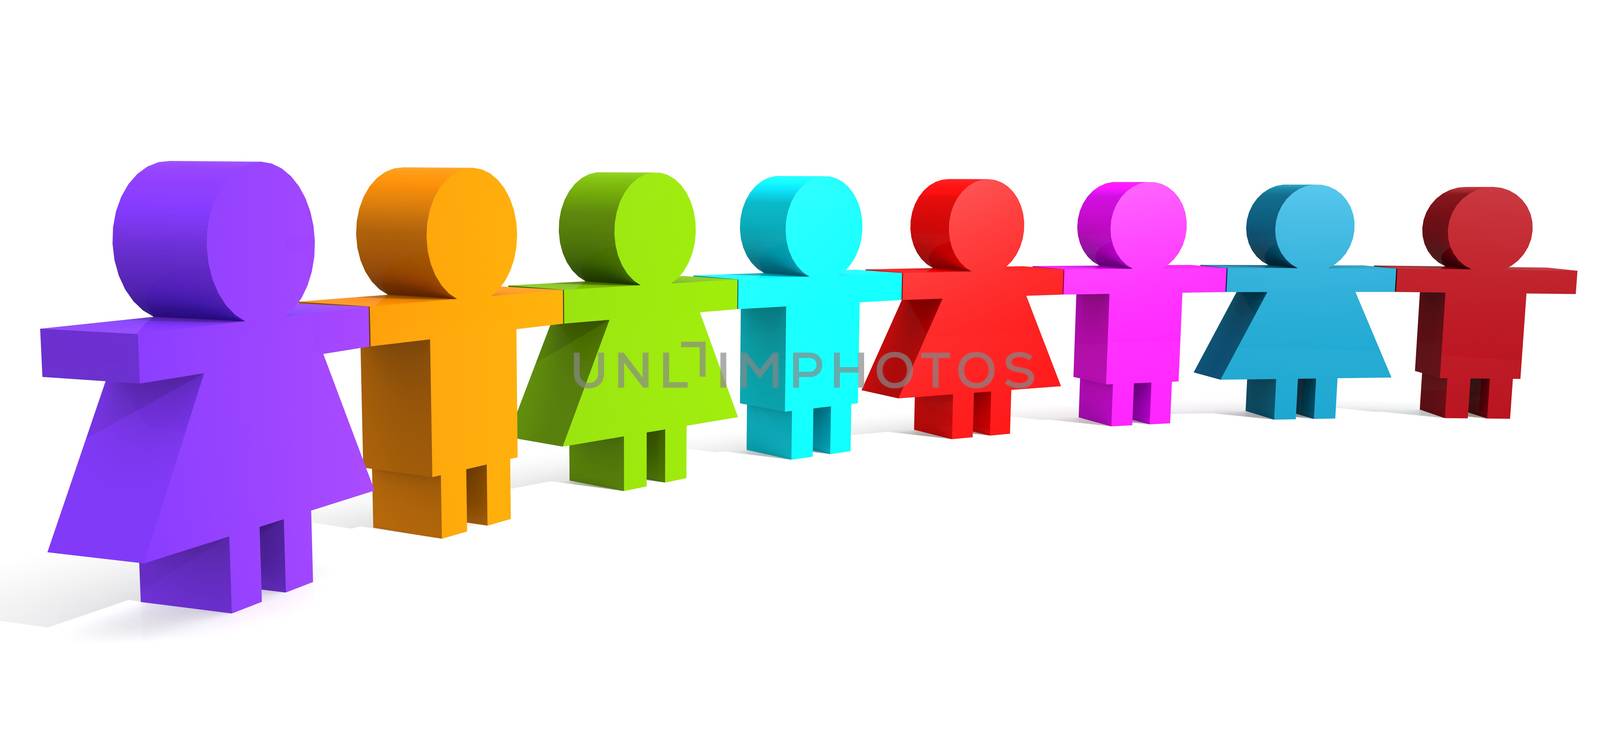 Multi color people in a line image with hi-res rendered artwork that could be used for any graphic design.